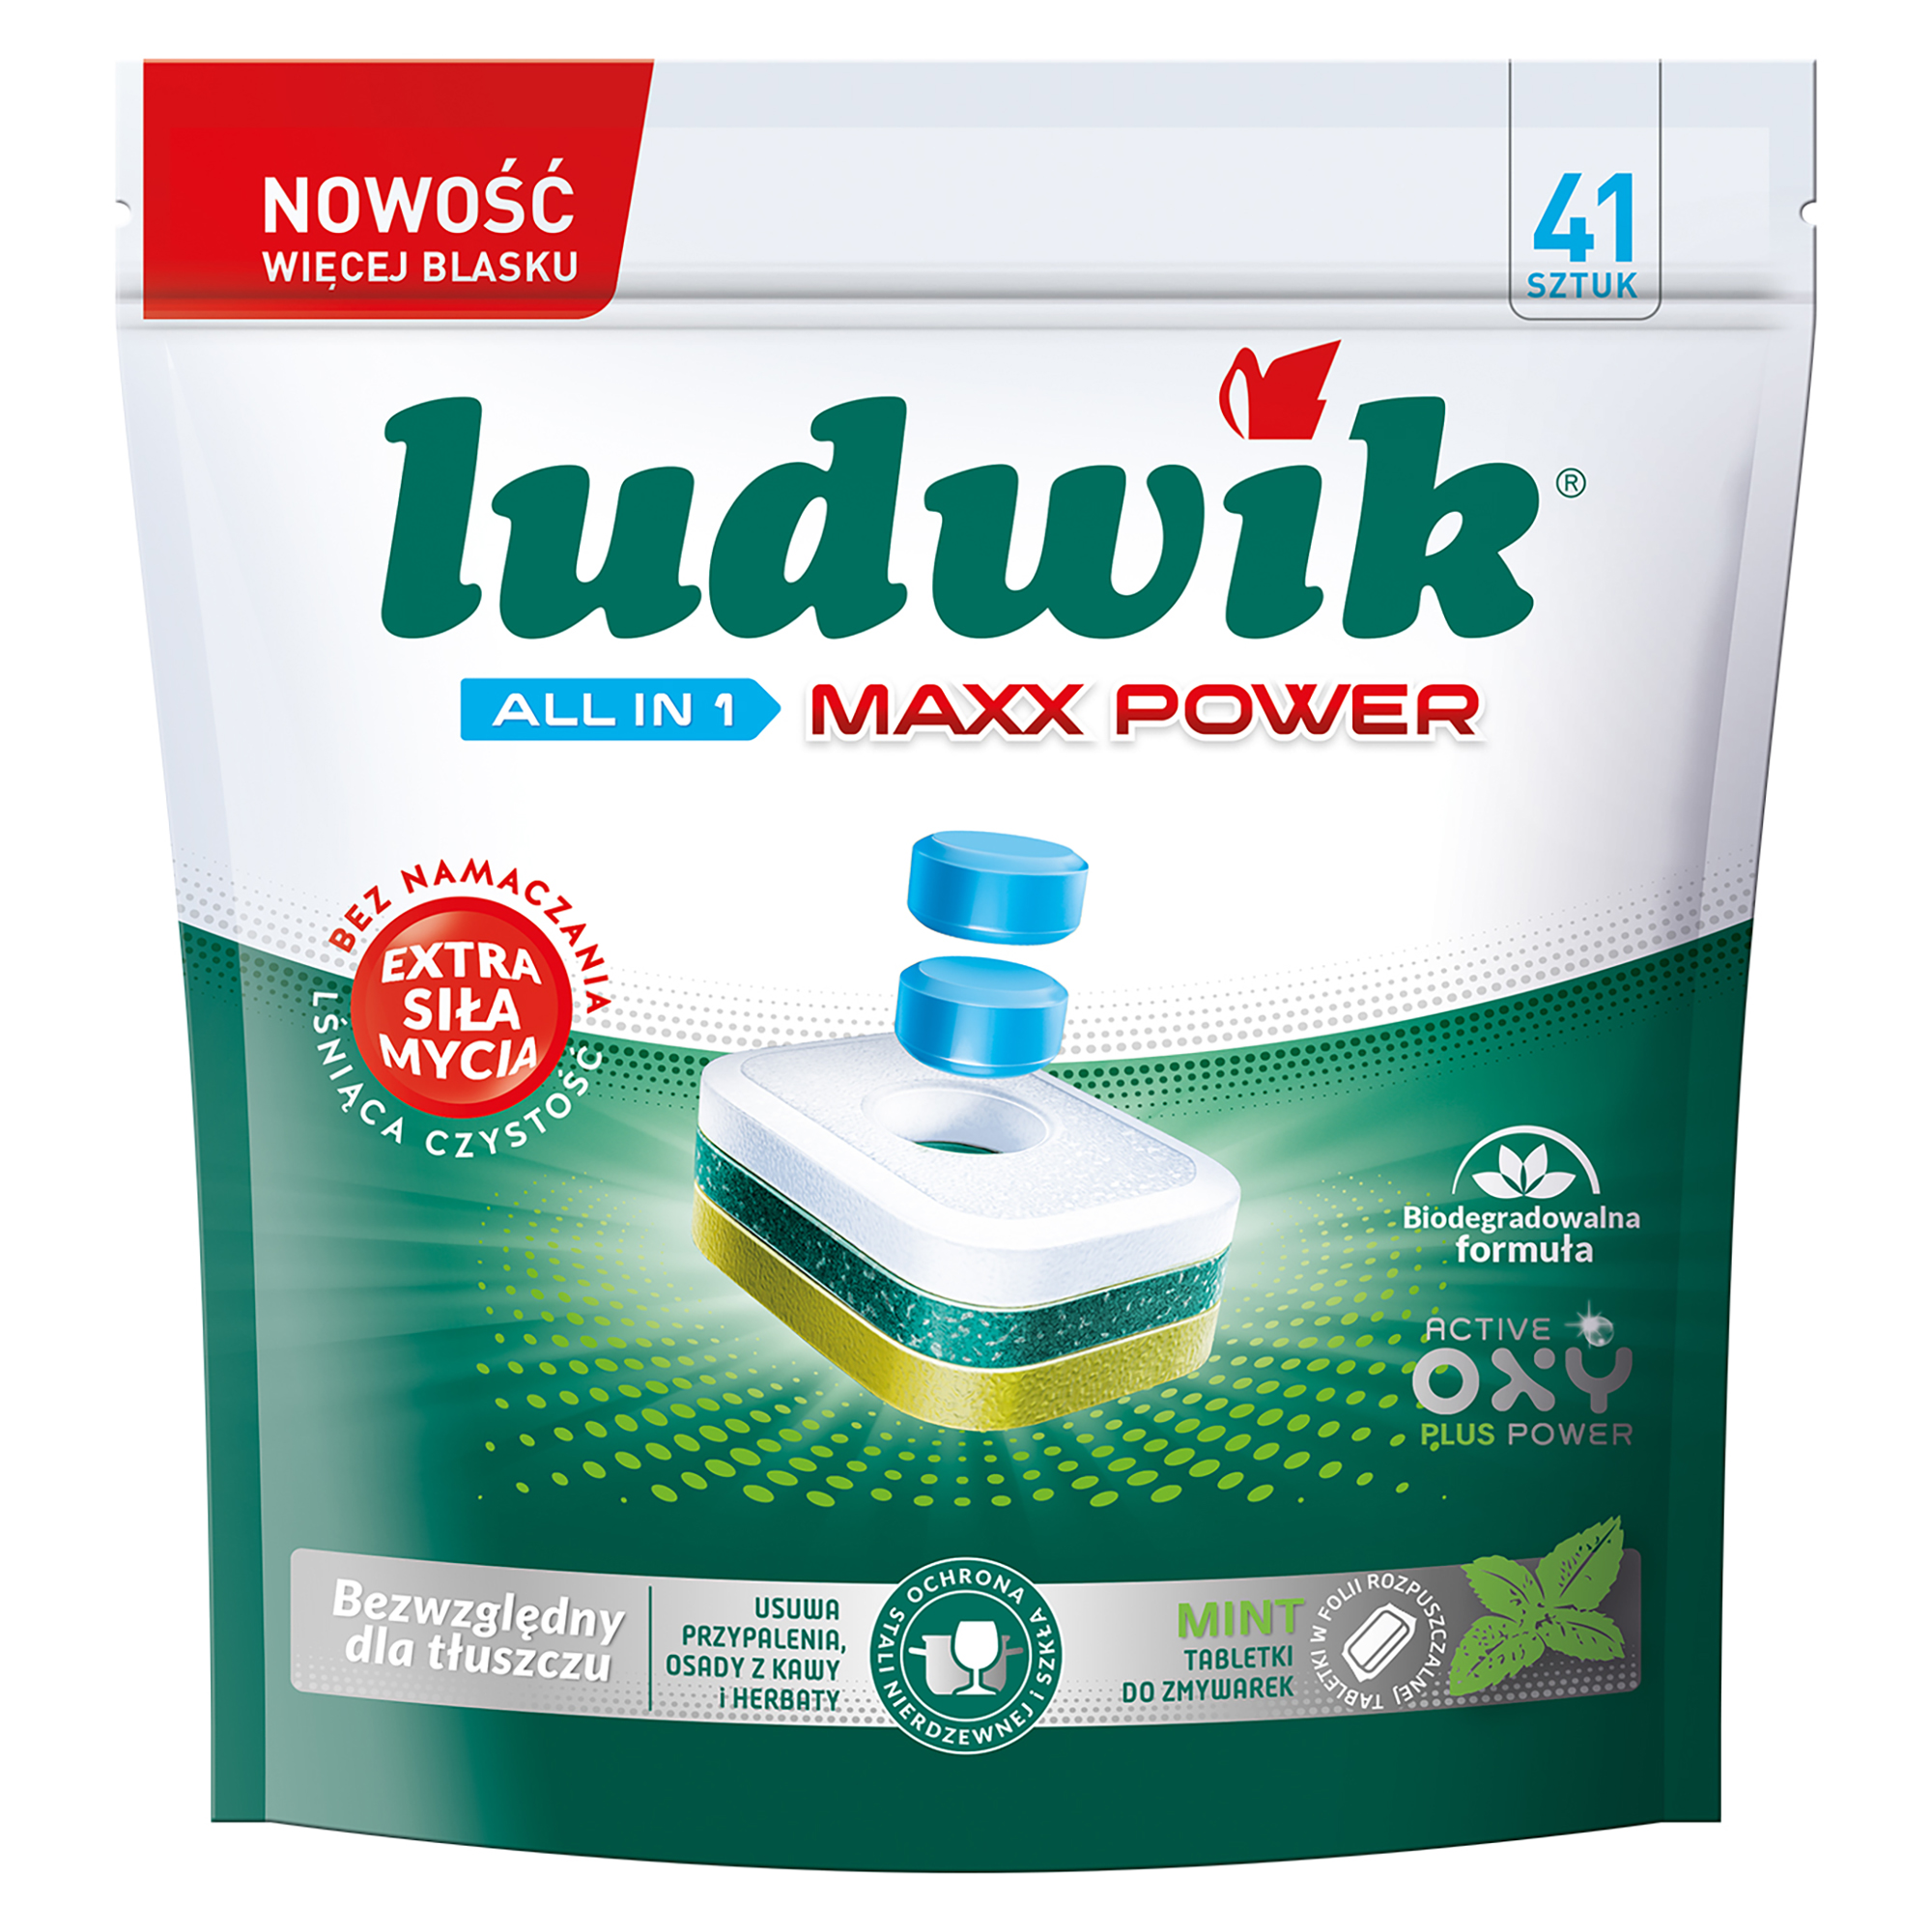 All in 1 Maxx Power dishwasher tablets in soluble film mint